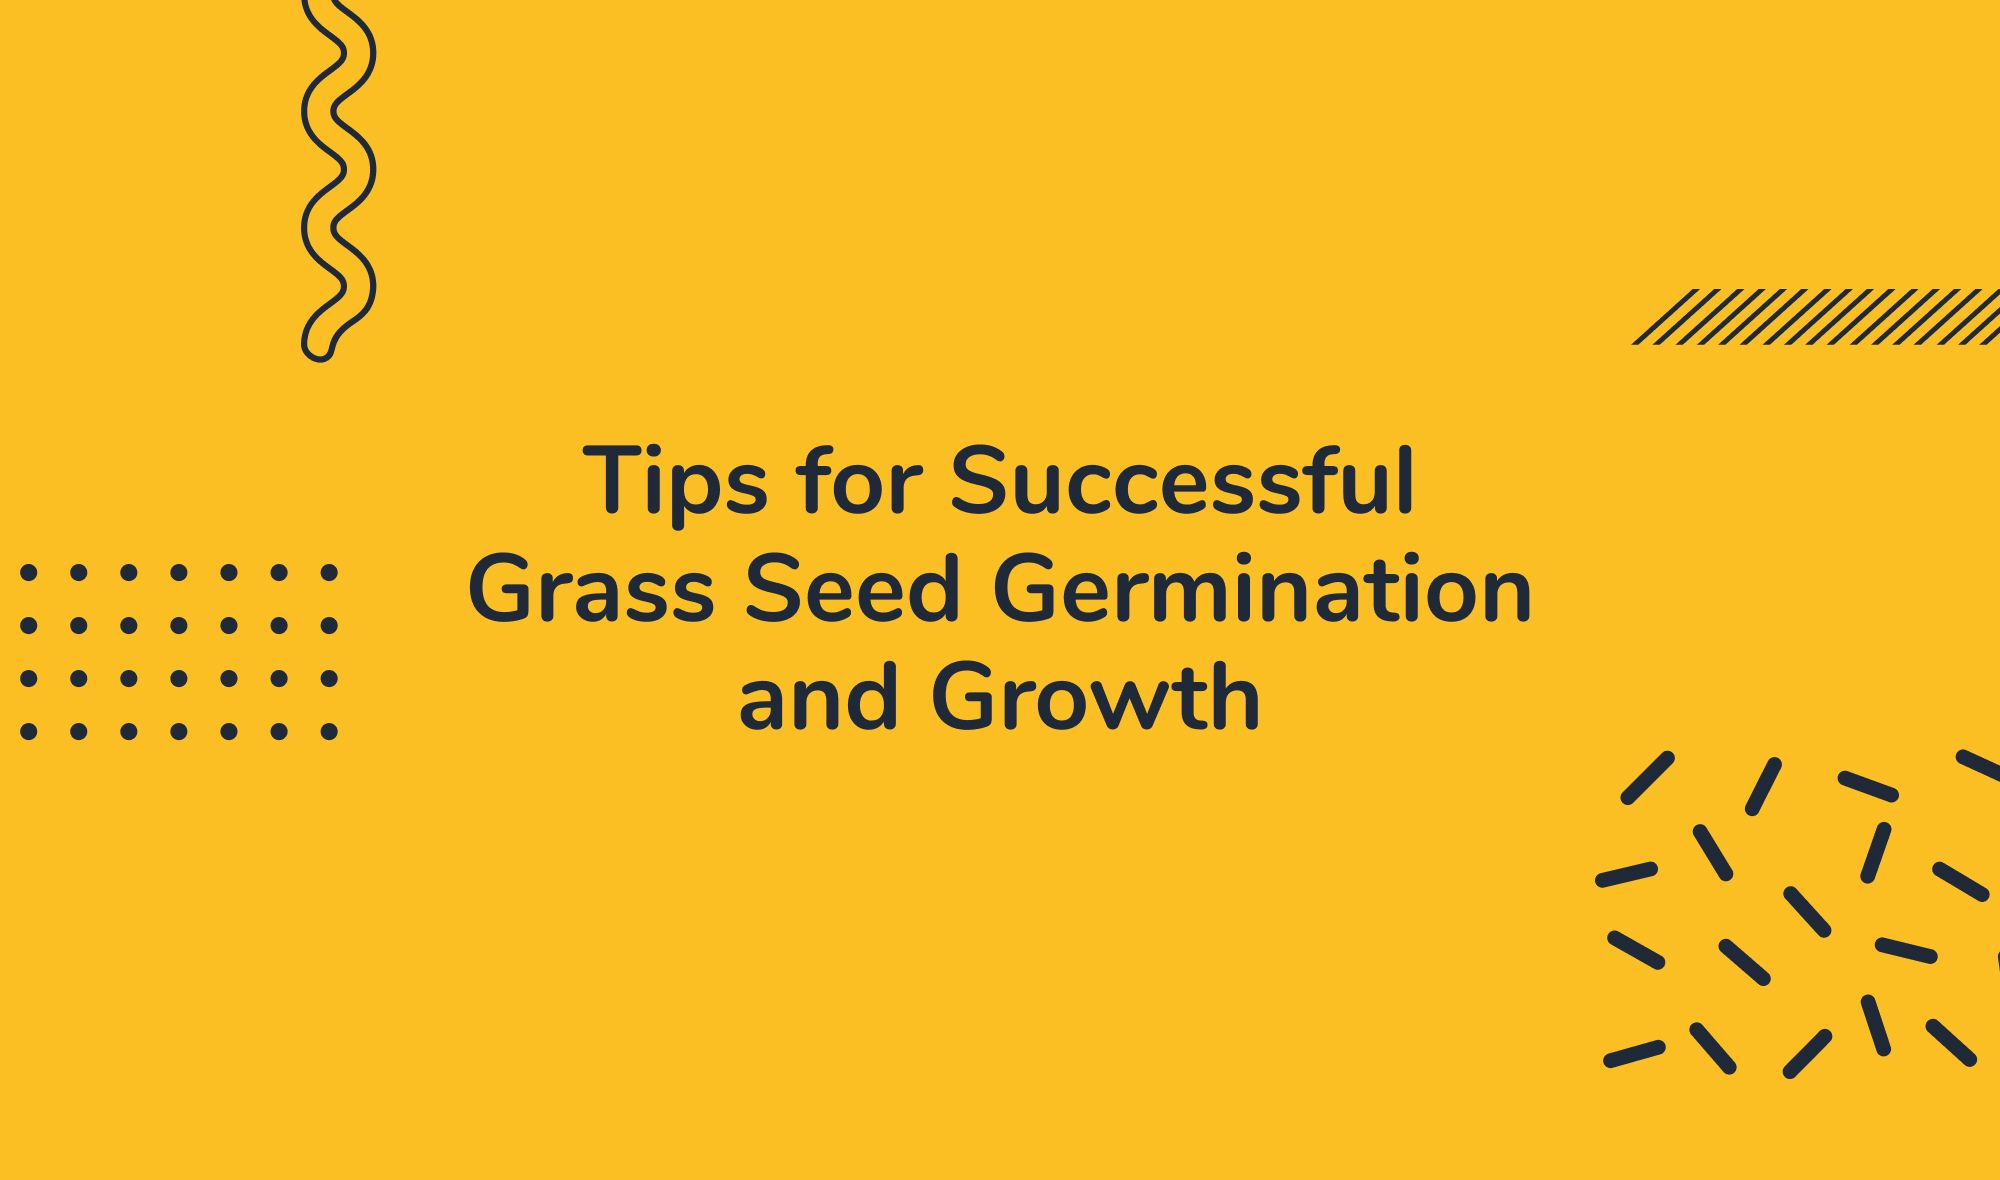 Tips for Successful Grass Seed Germination and Growth